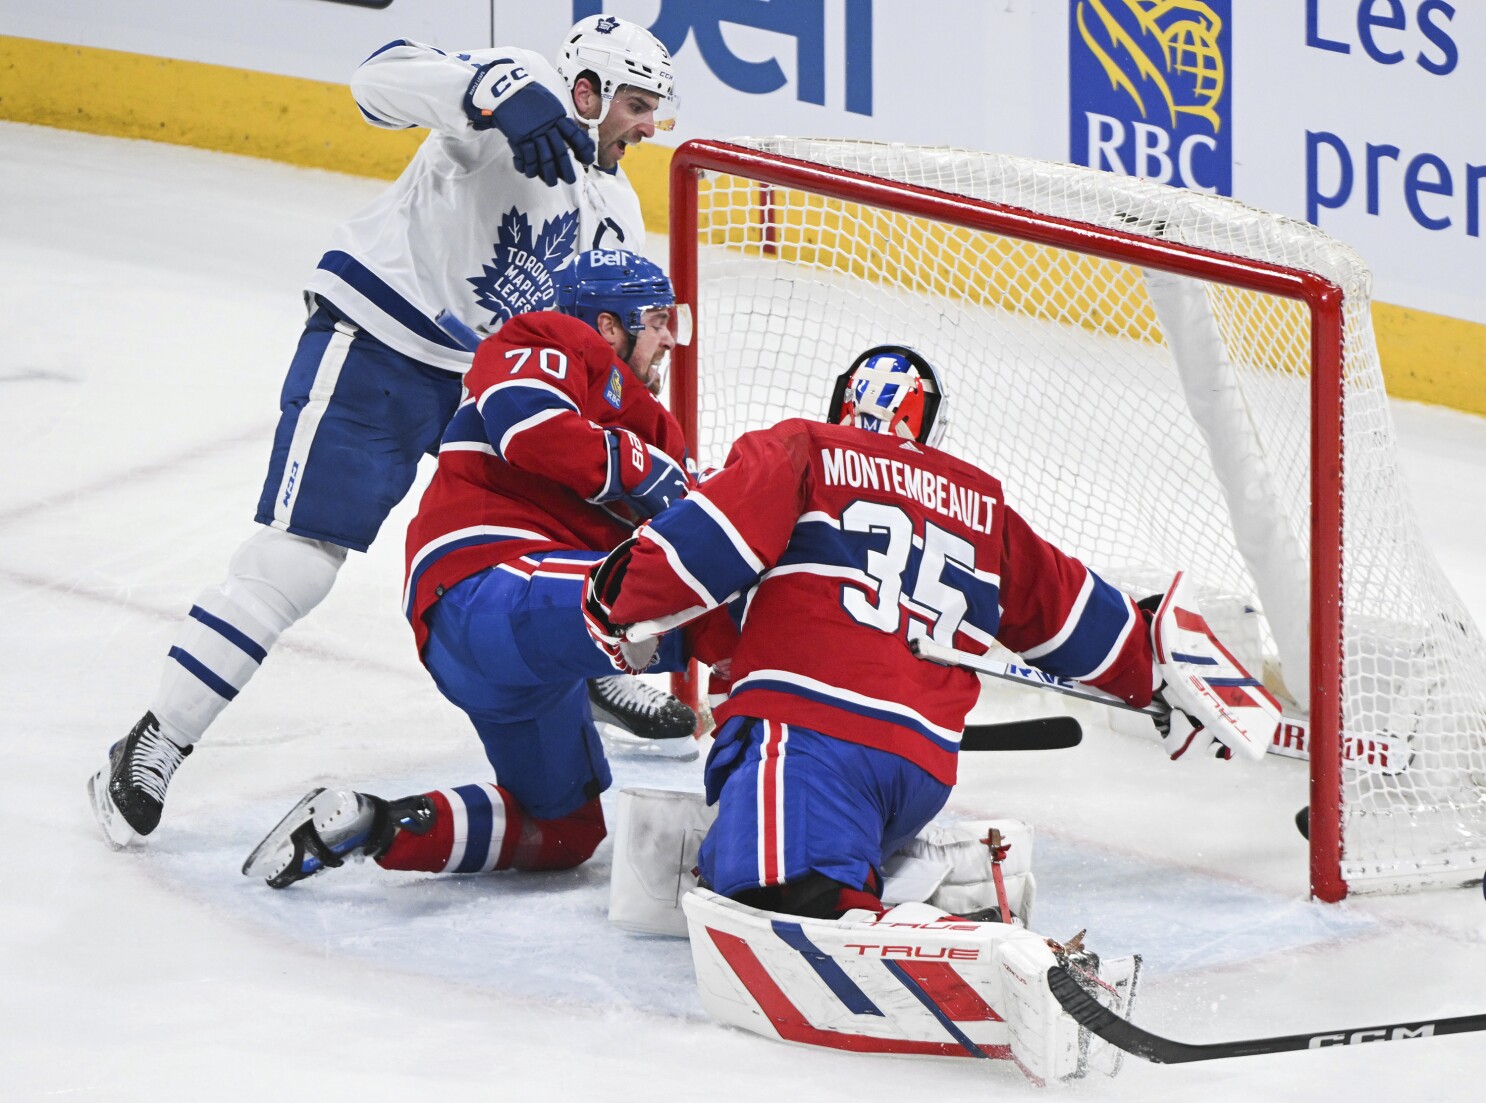 John Tavares breaks late tie with 20th goal, Maple Leafs beat